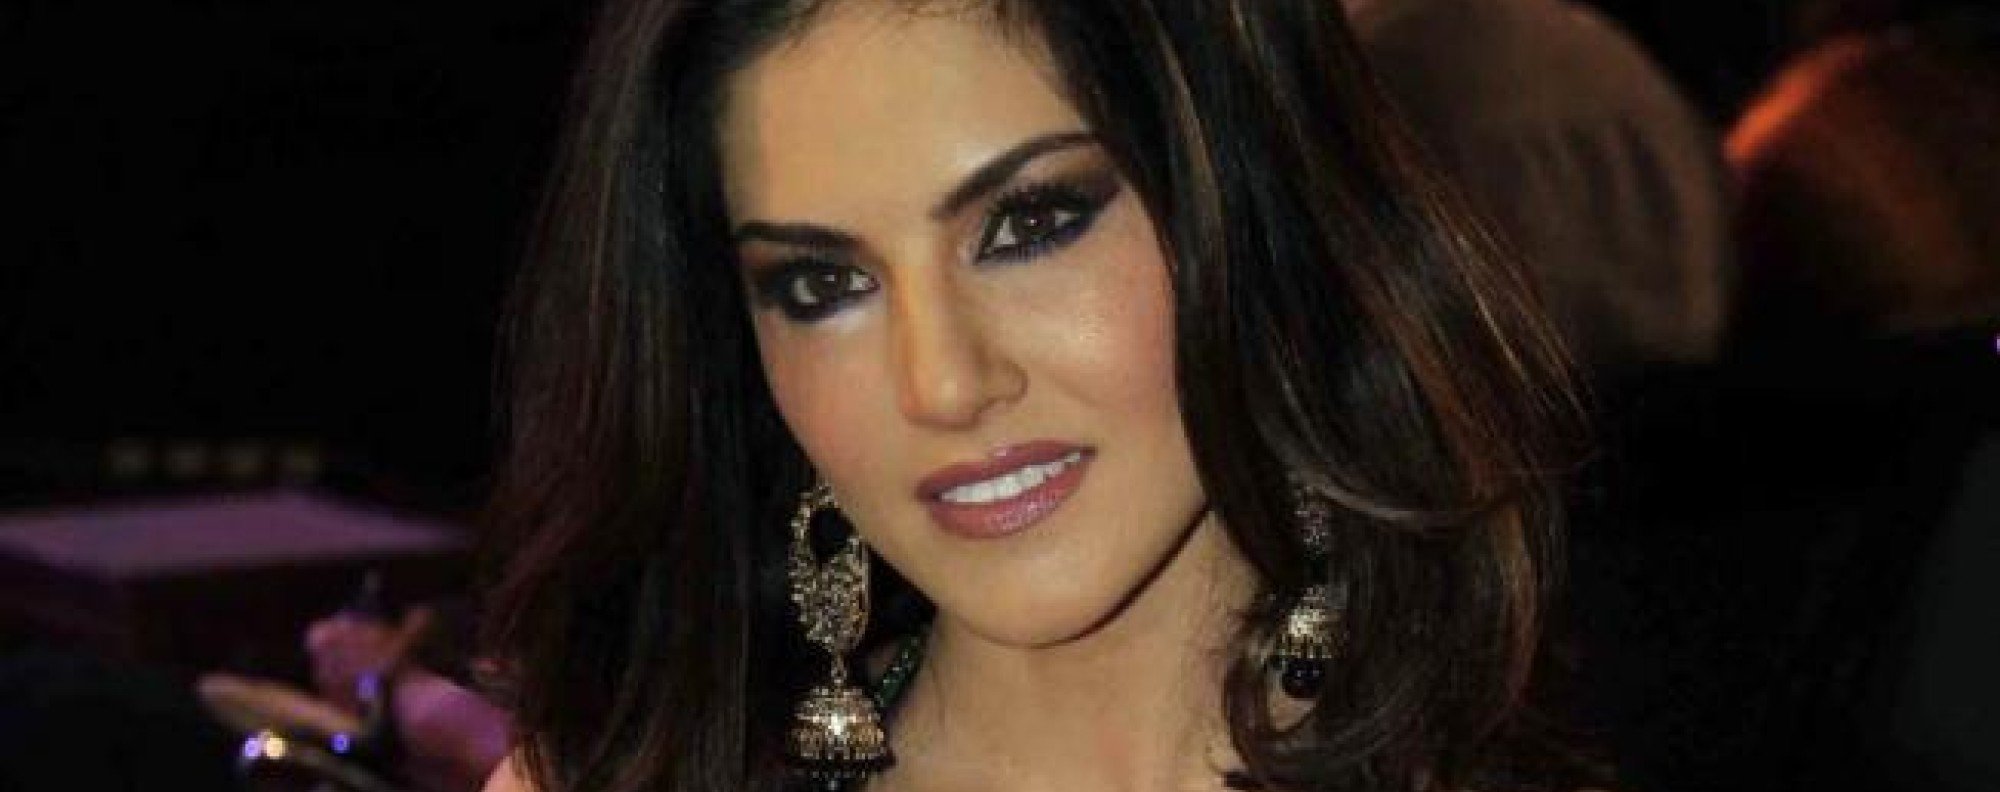 Xxxxx Rape Video - Rape crisis in India leads to calls for porn star Sunny Leone to be jailed  | South China Morning Post